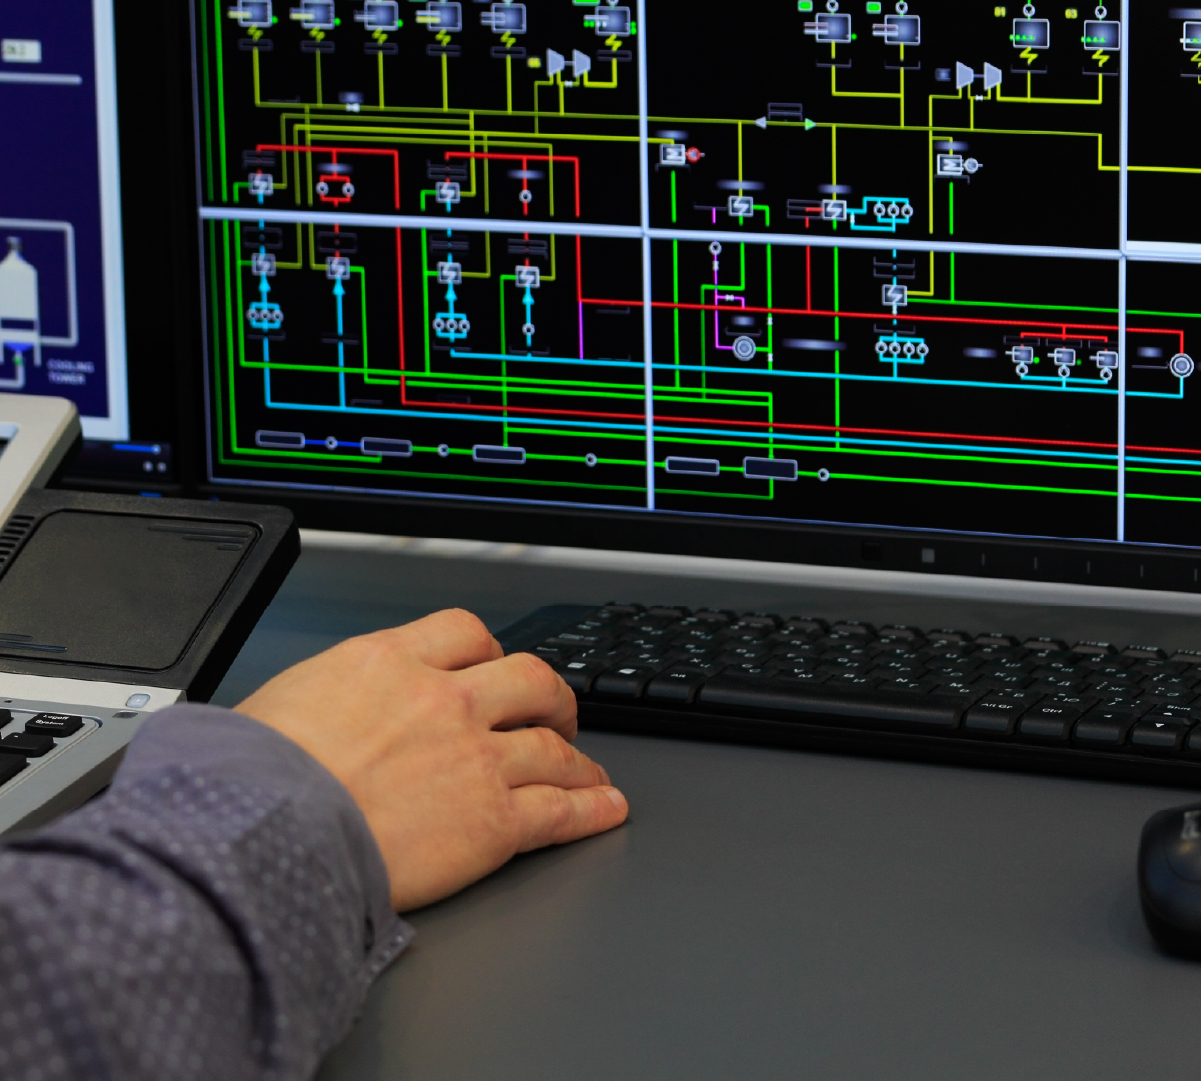 User at computer with SCADA industrial controls shown on screen